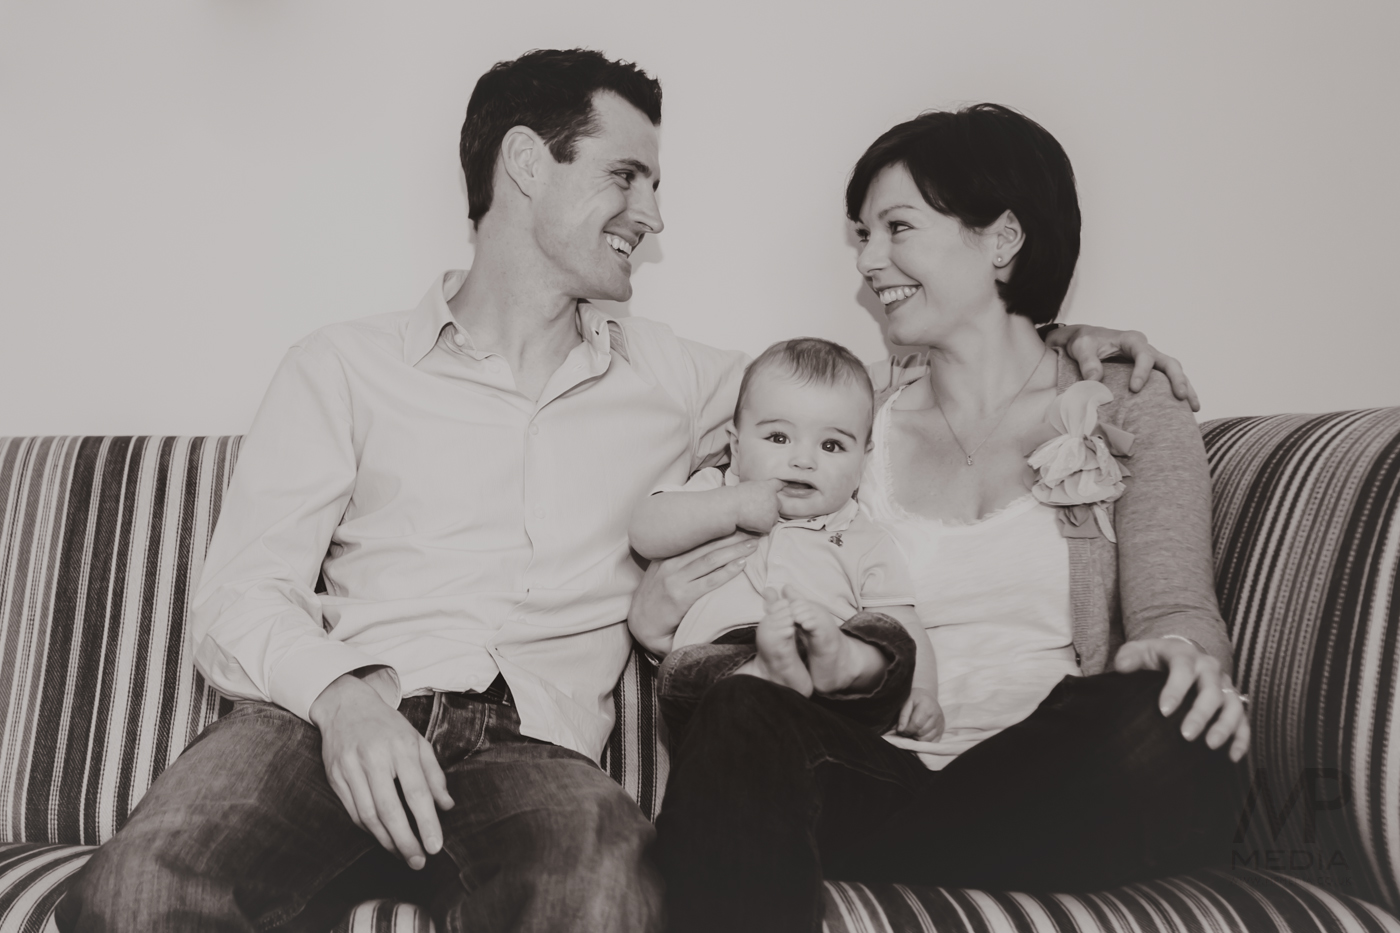 001 - Joanne, Alan and Ethan Fine Art Family Photography by Pamela and Mark Pugh Team MP - www.mpmedia.co.uk - Part Two - Do NOT remove the watermark or edit this image without consent -0267.JPG